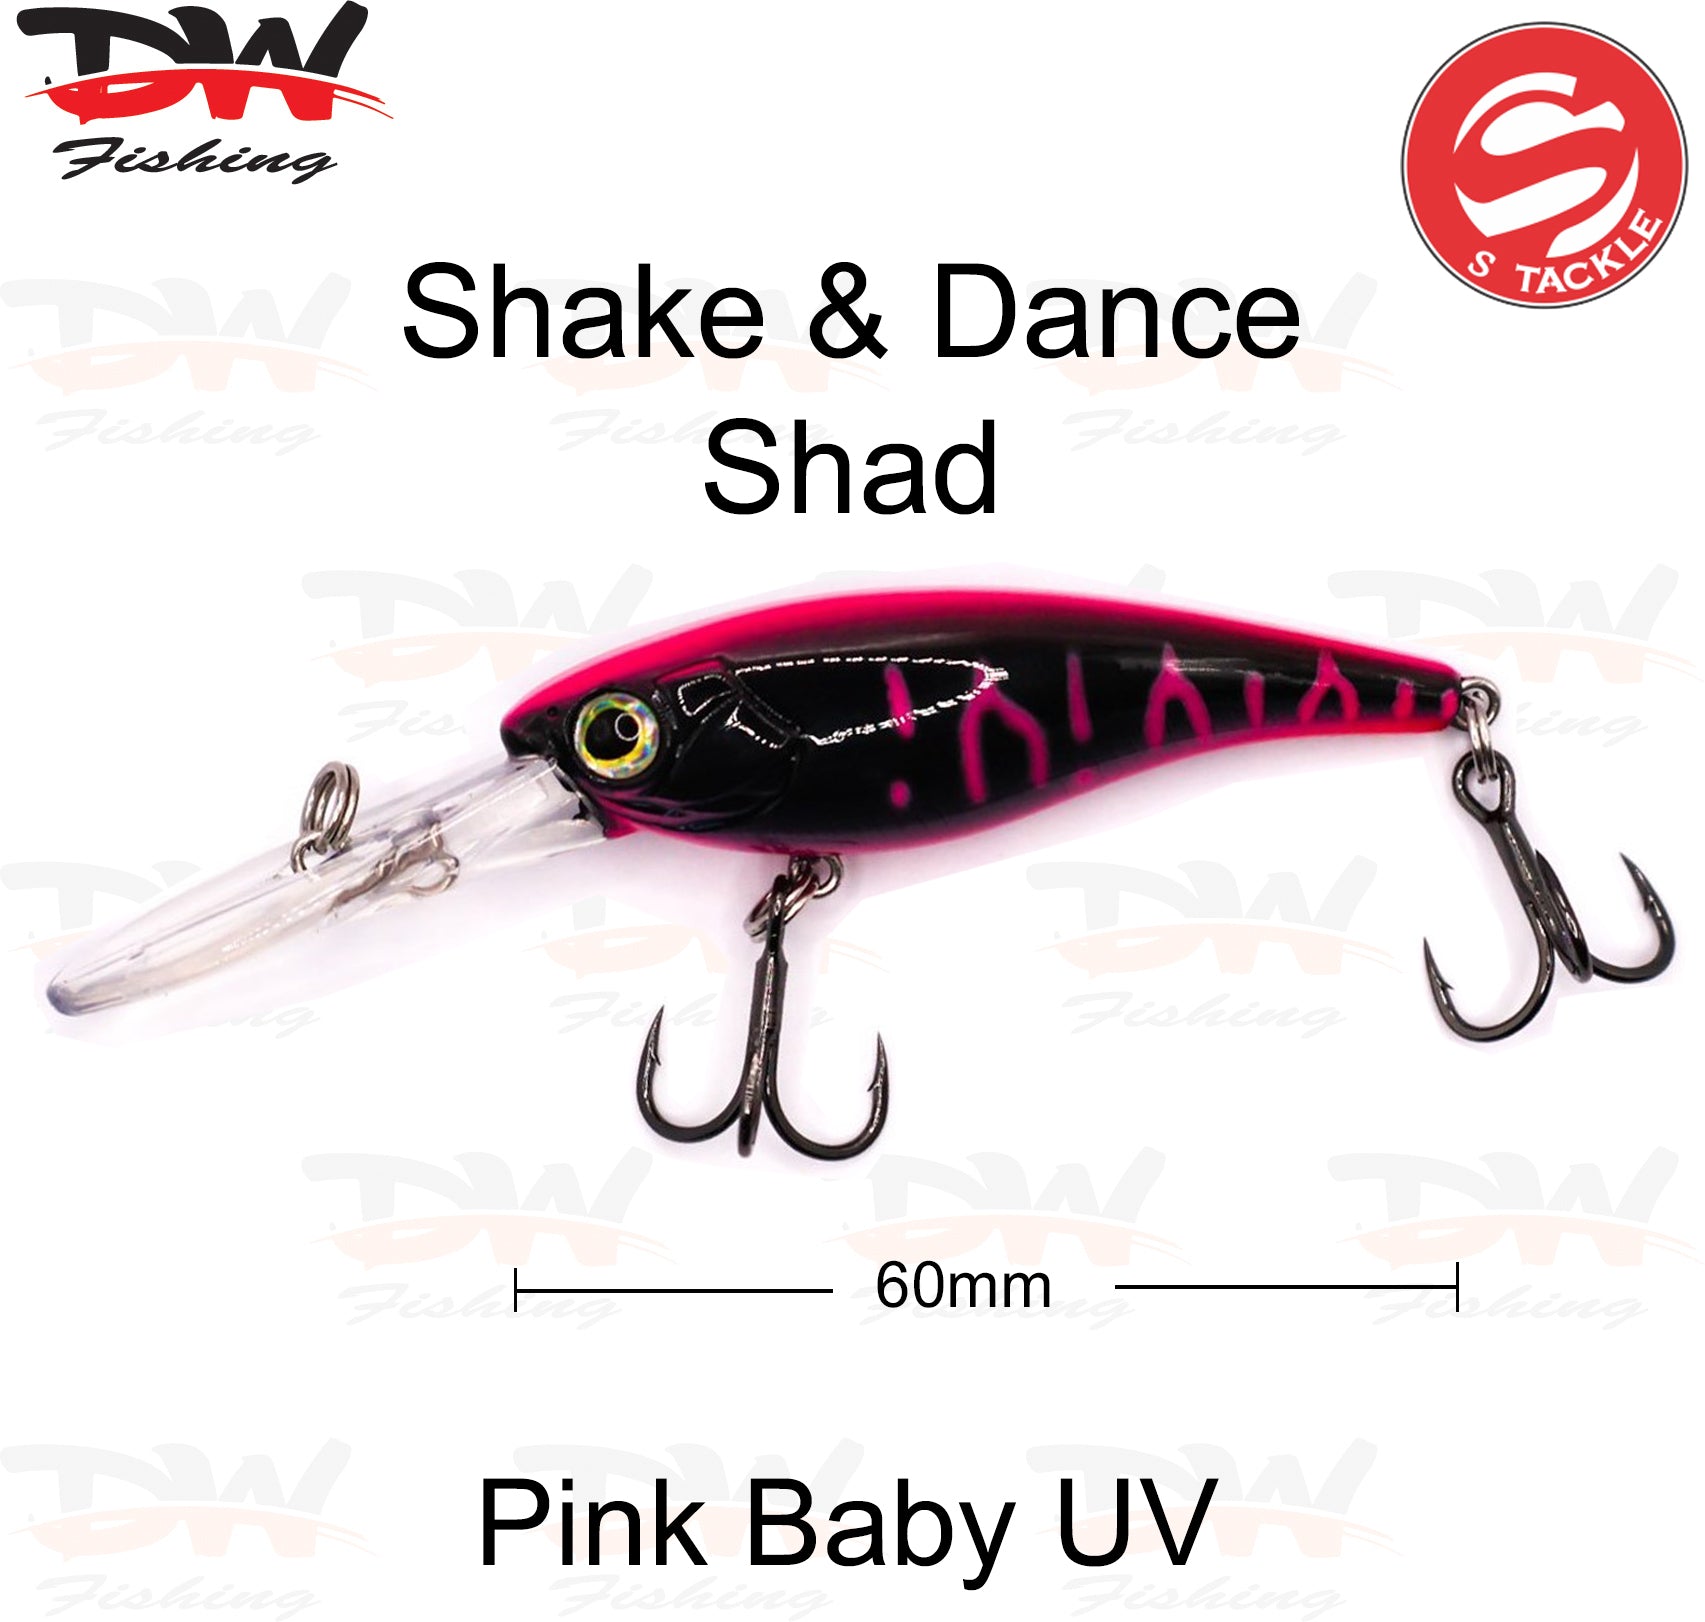 The Shake and Dance Hard Body 60mm lure colour is Ambassador UV